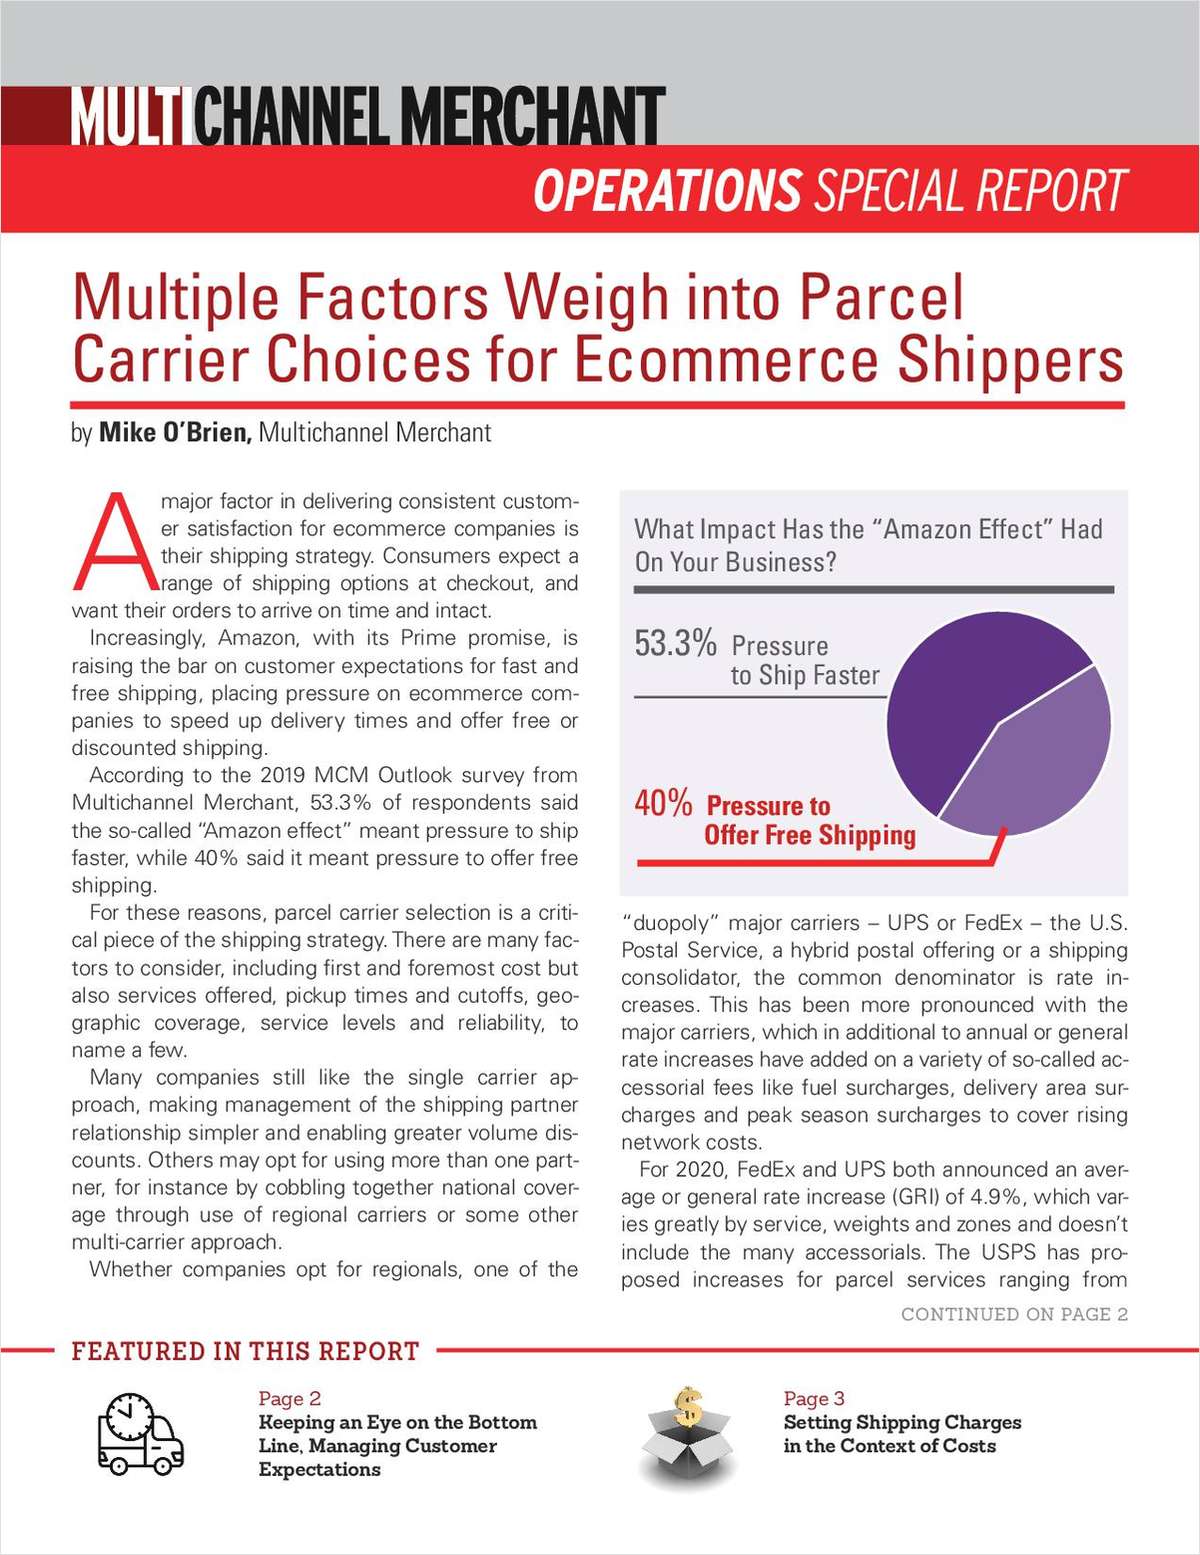 Multiple Factors Weigh into Parcel Carrier Choices for Ecommerce Shippers